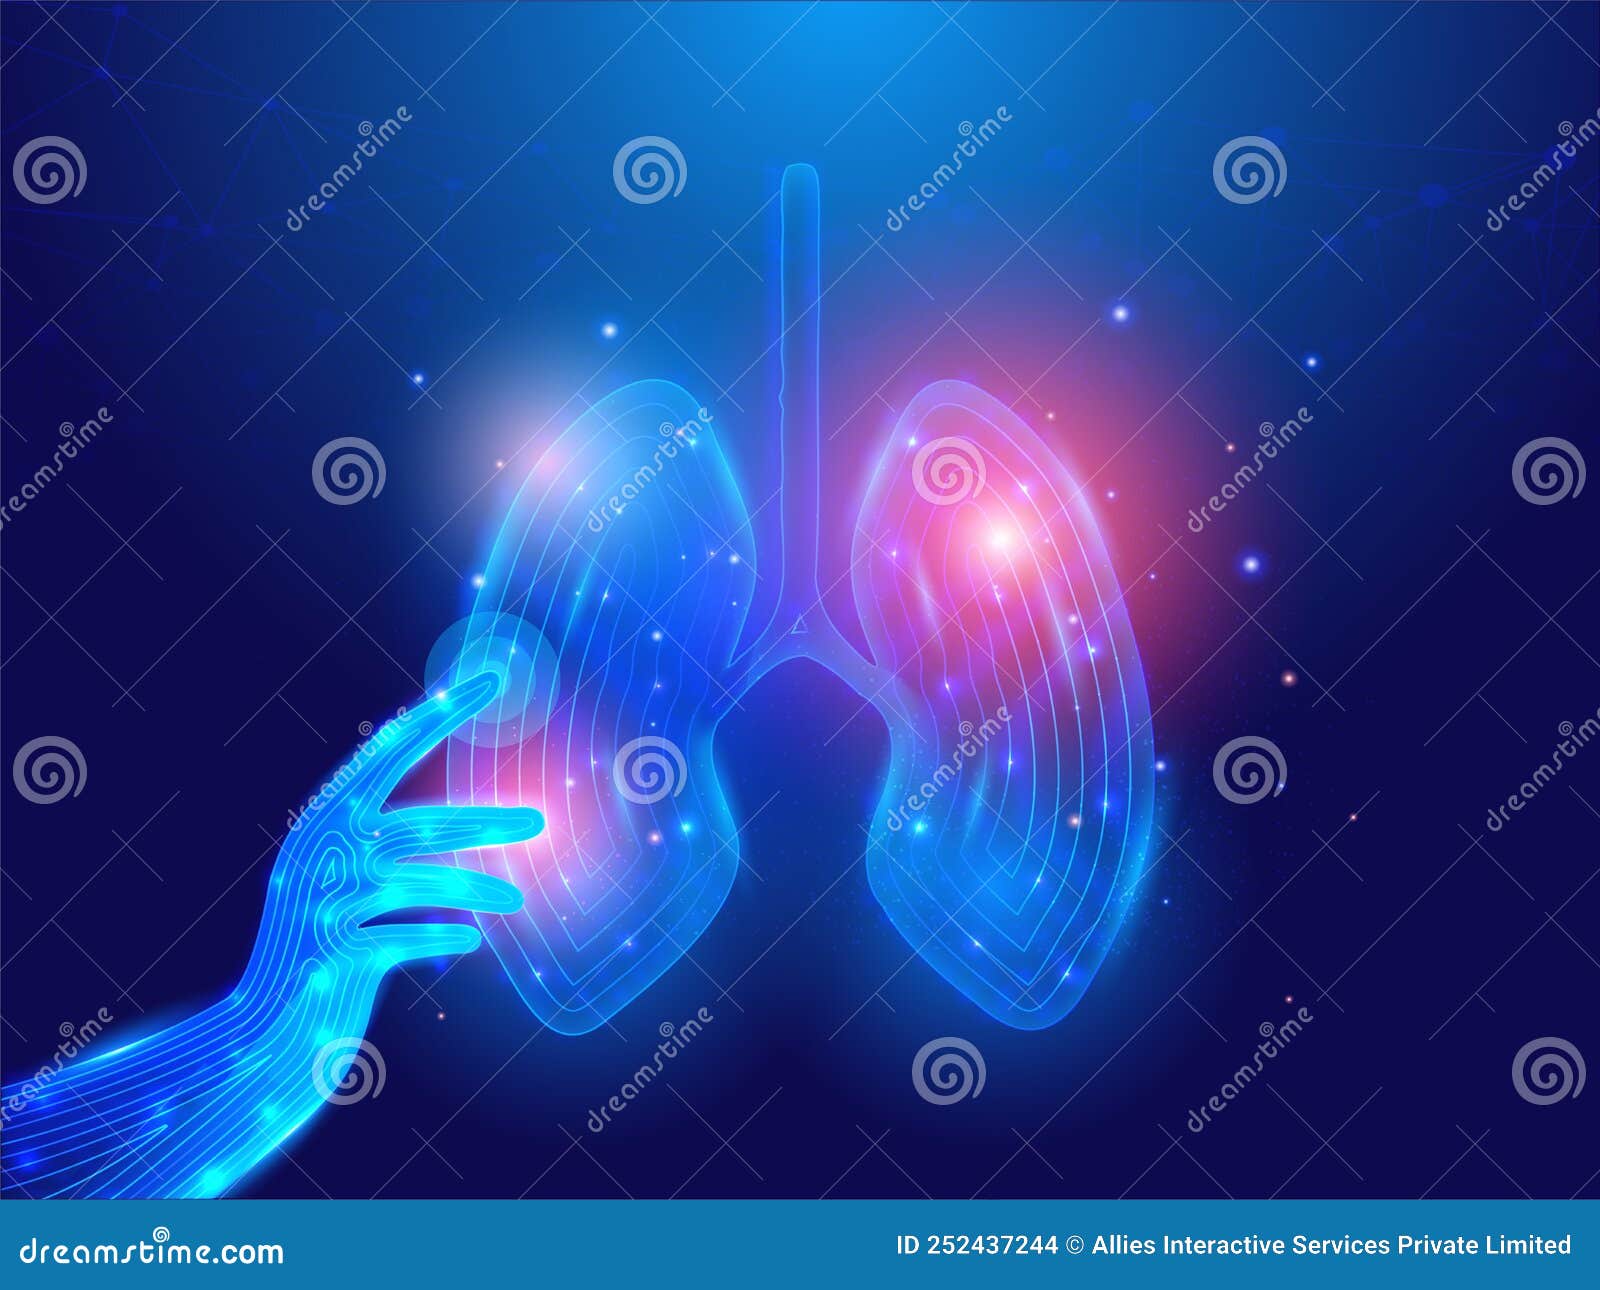 Biotechnology Concept with Human Lungs Touching by Hands. AI Healthcare